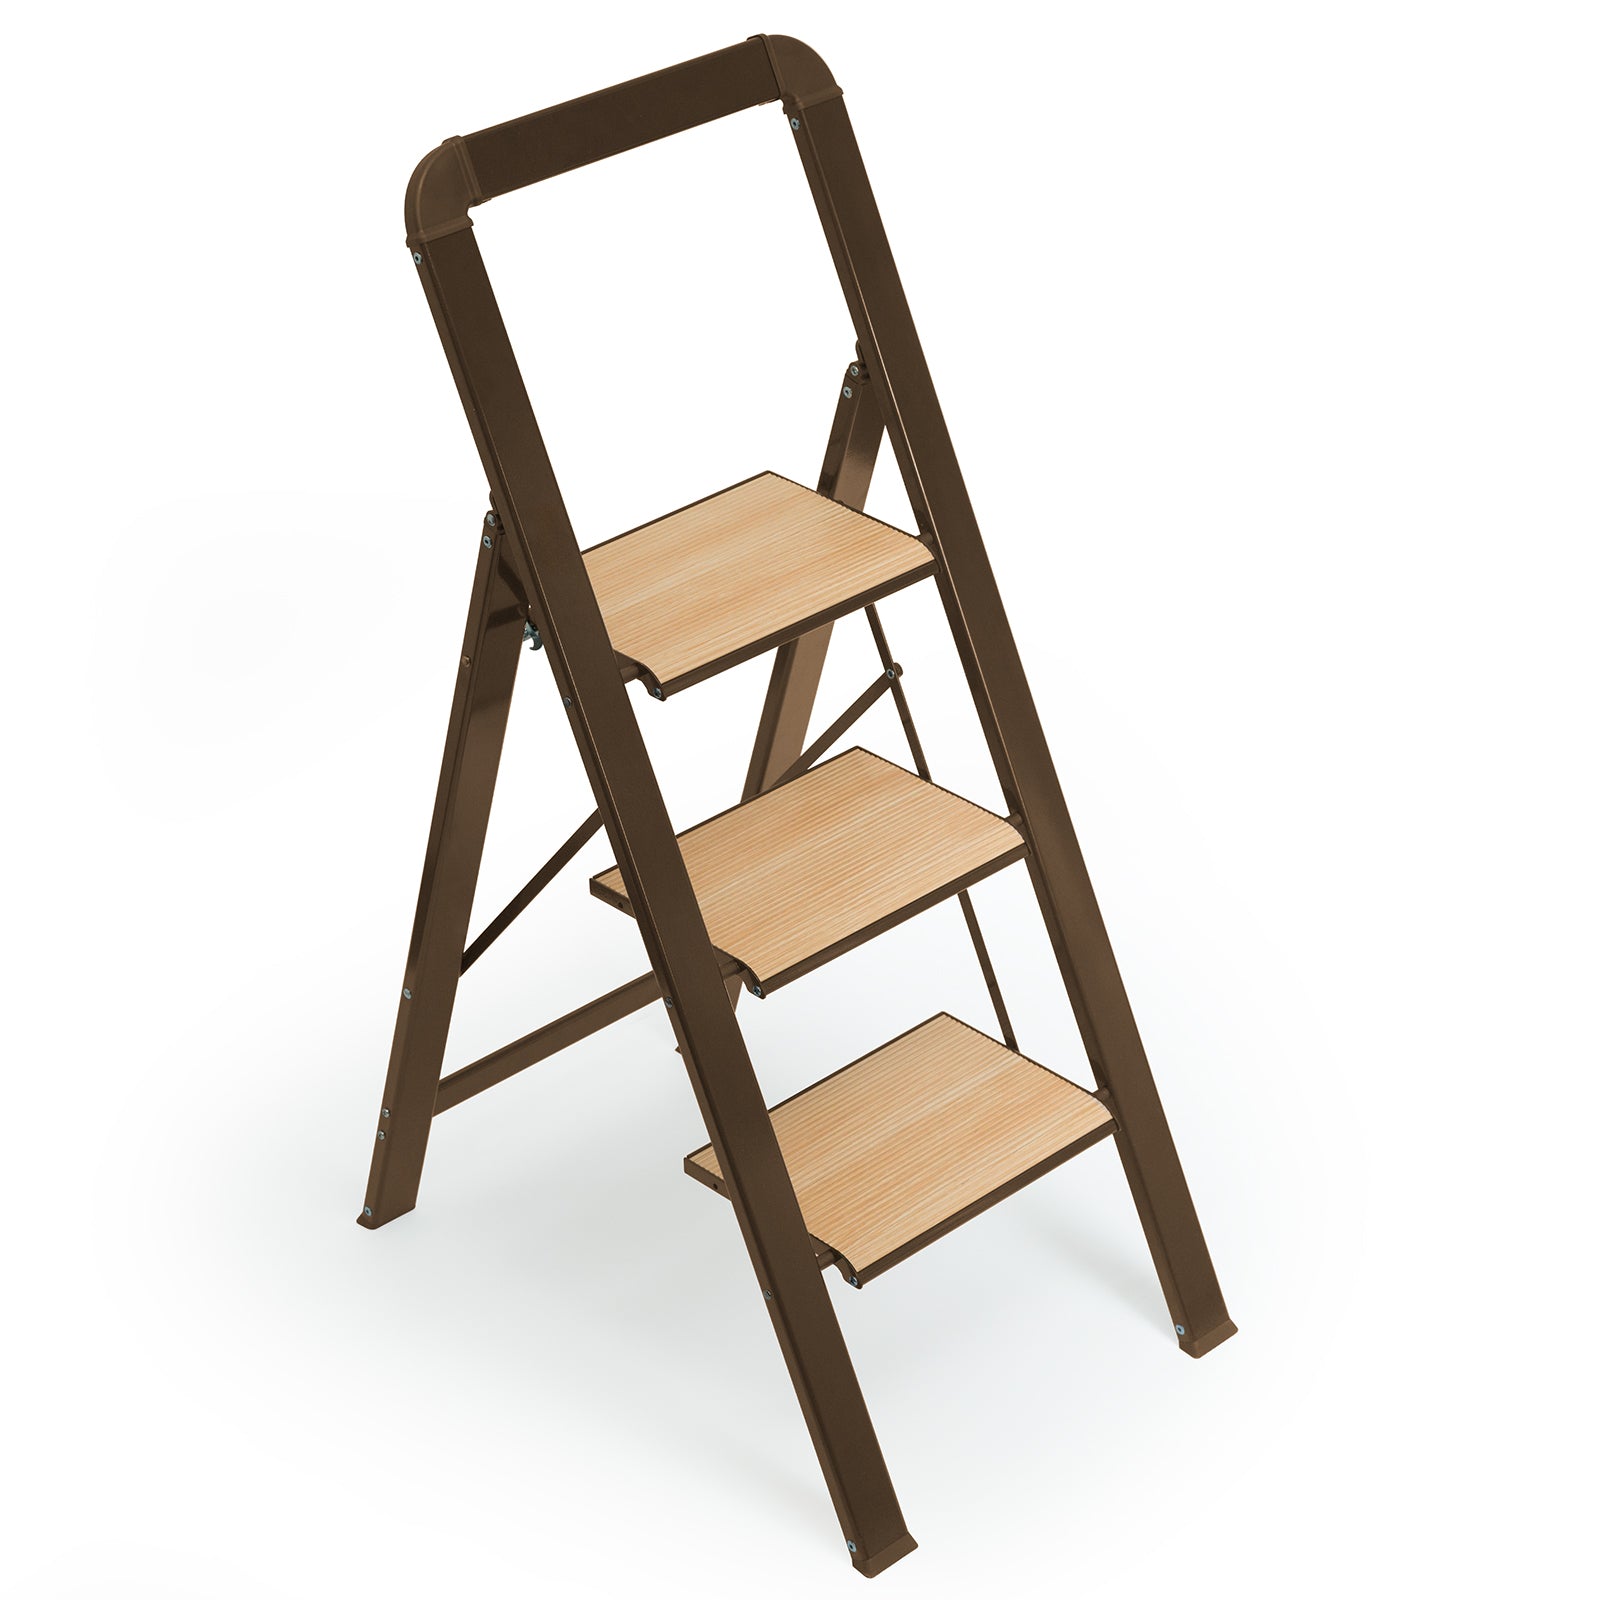 3 Step Ladder Folding Step Stool for Adults with Wide brown-aluminum